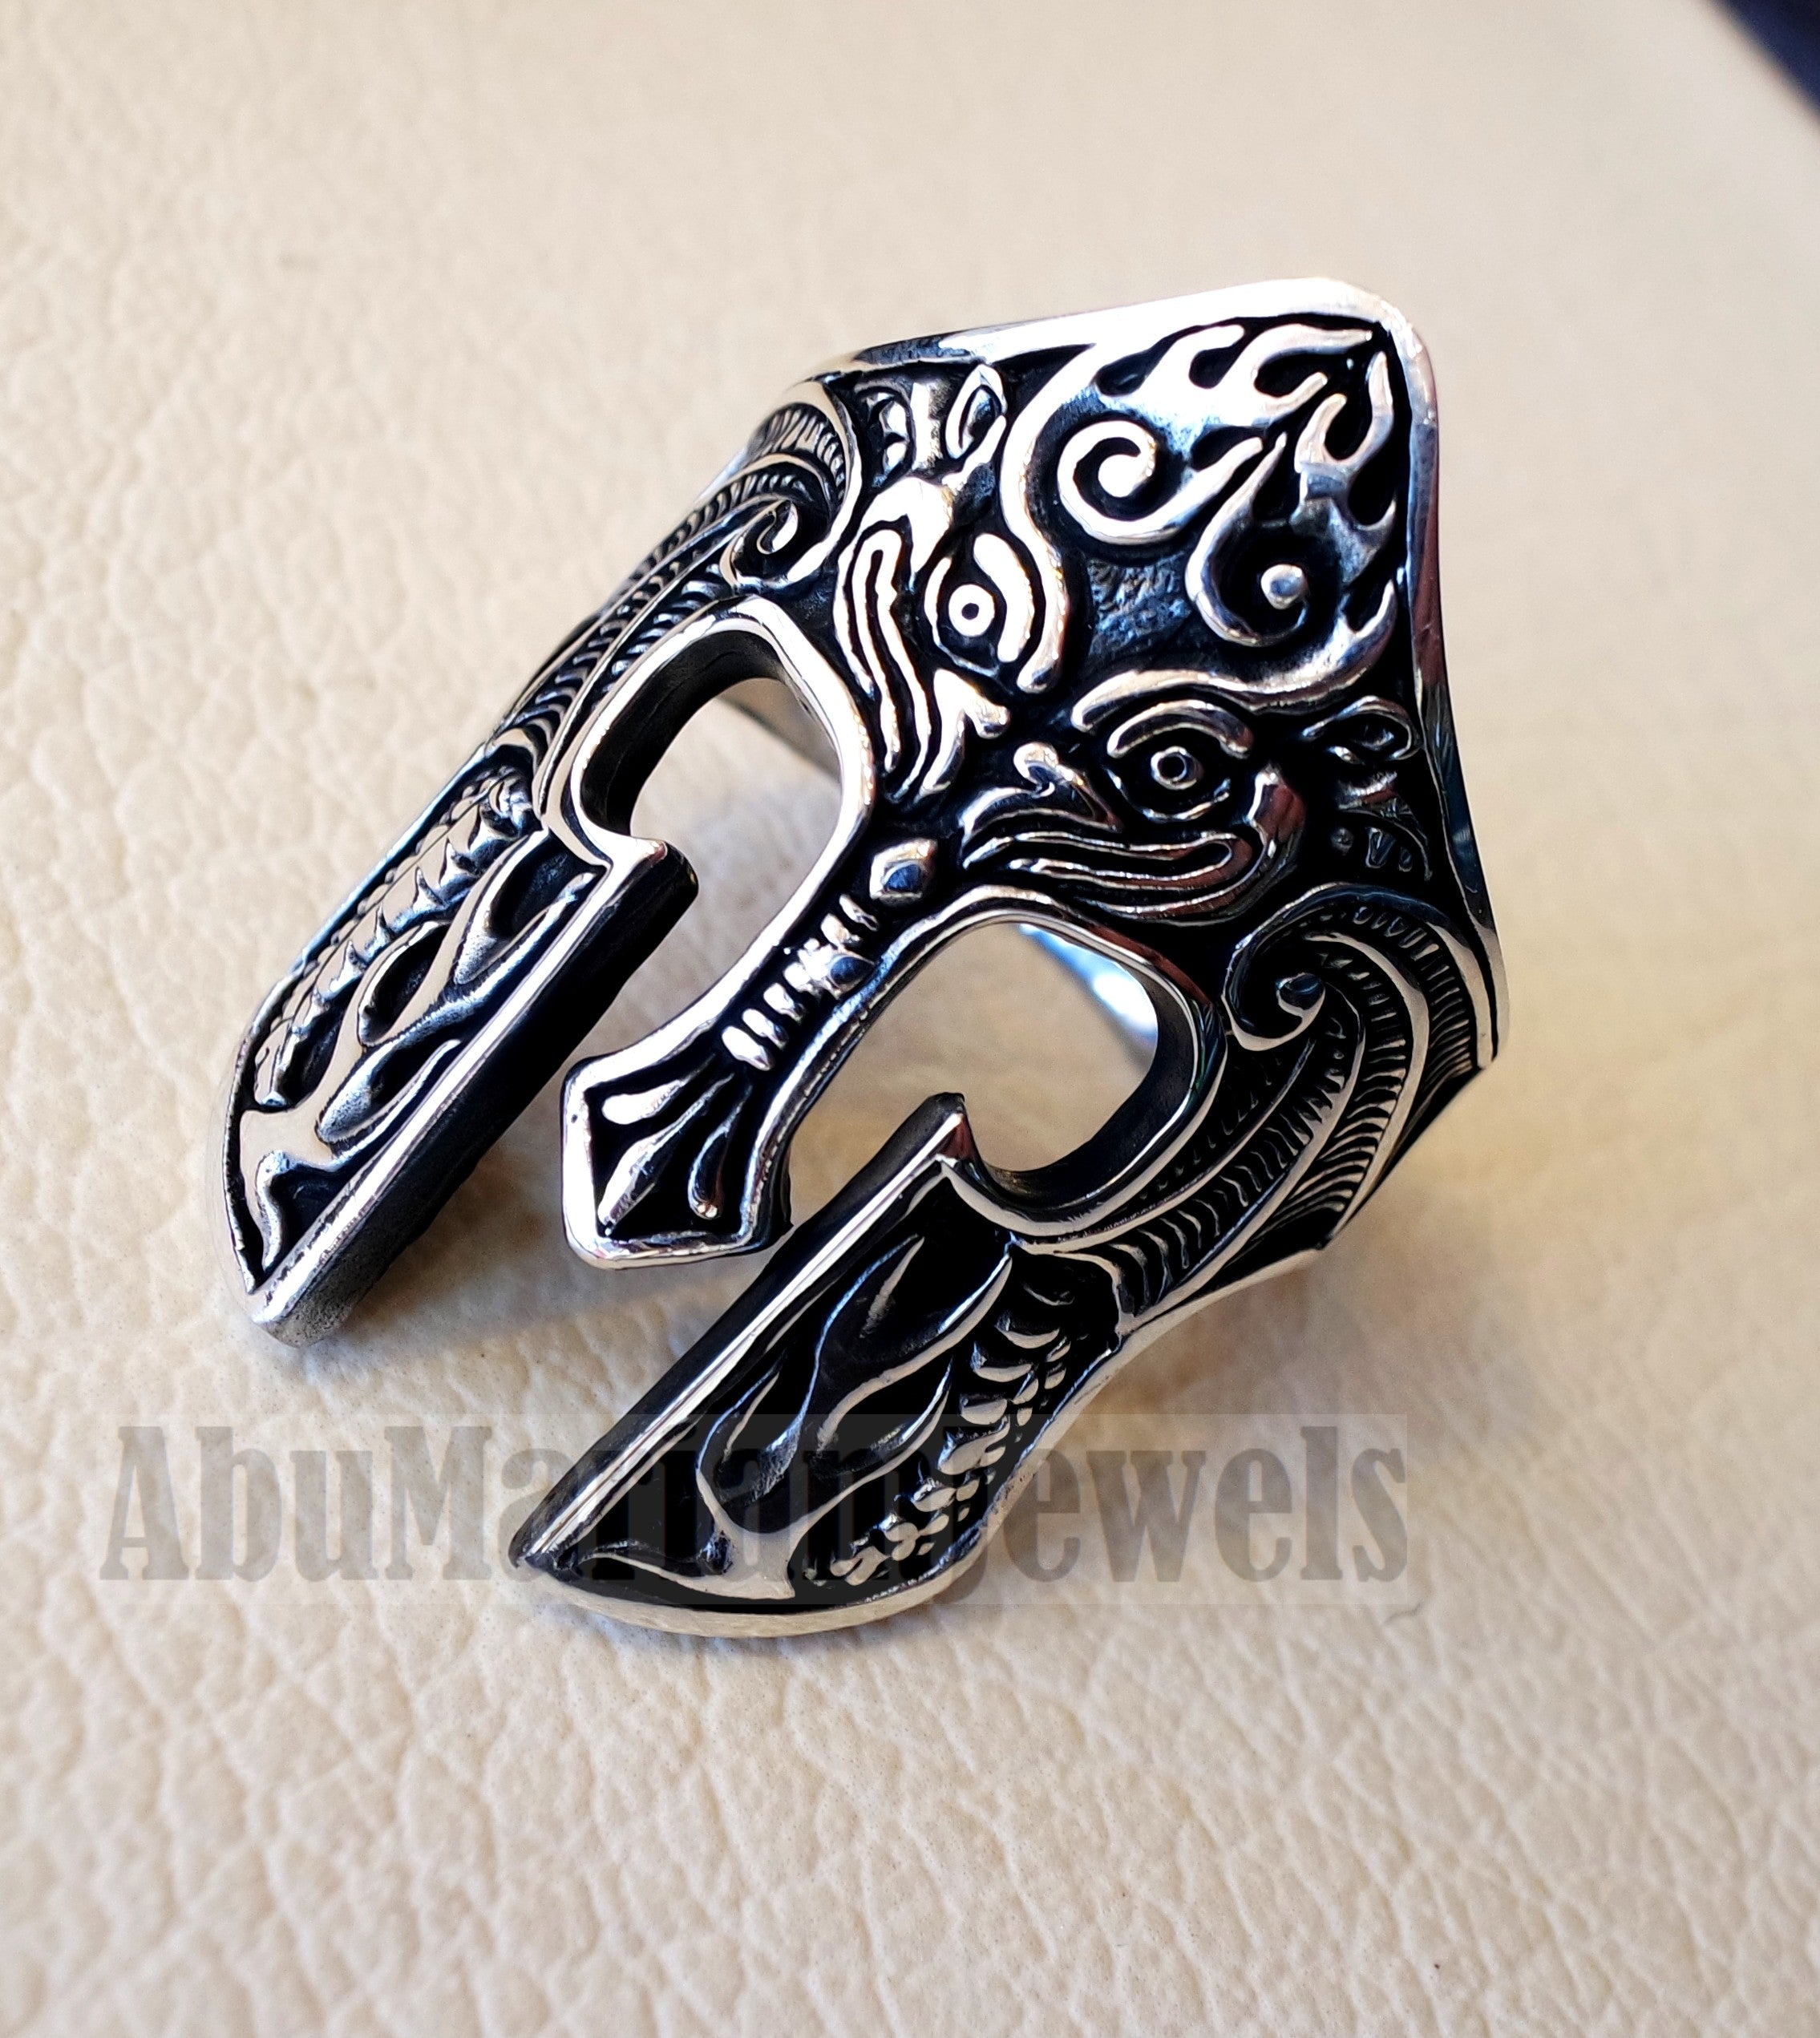 Warrior ring face mask ring sterling silver 925 huge man jewelry piece all sizes fast express shipping